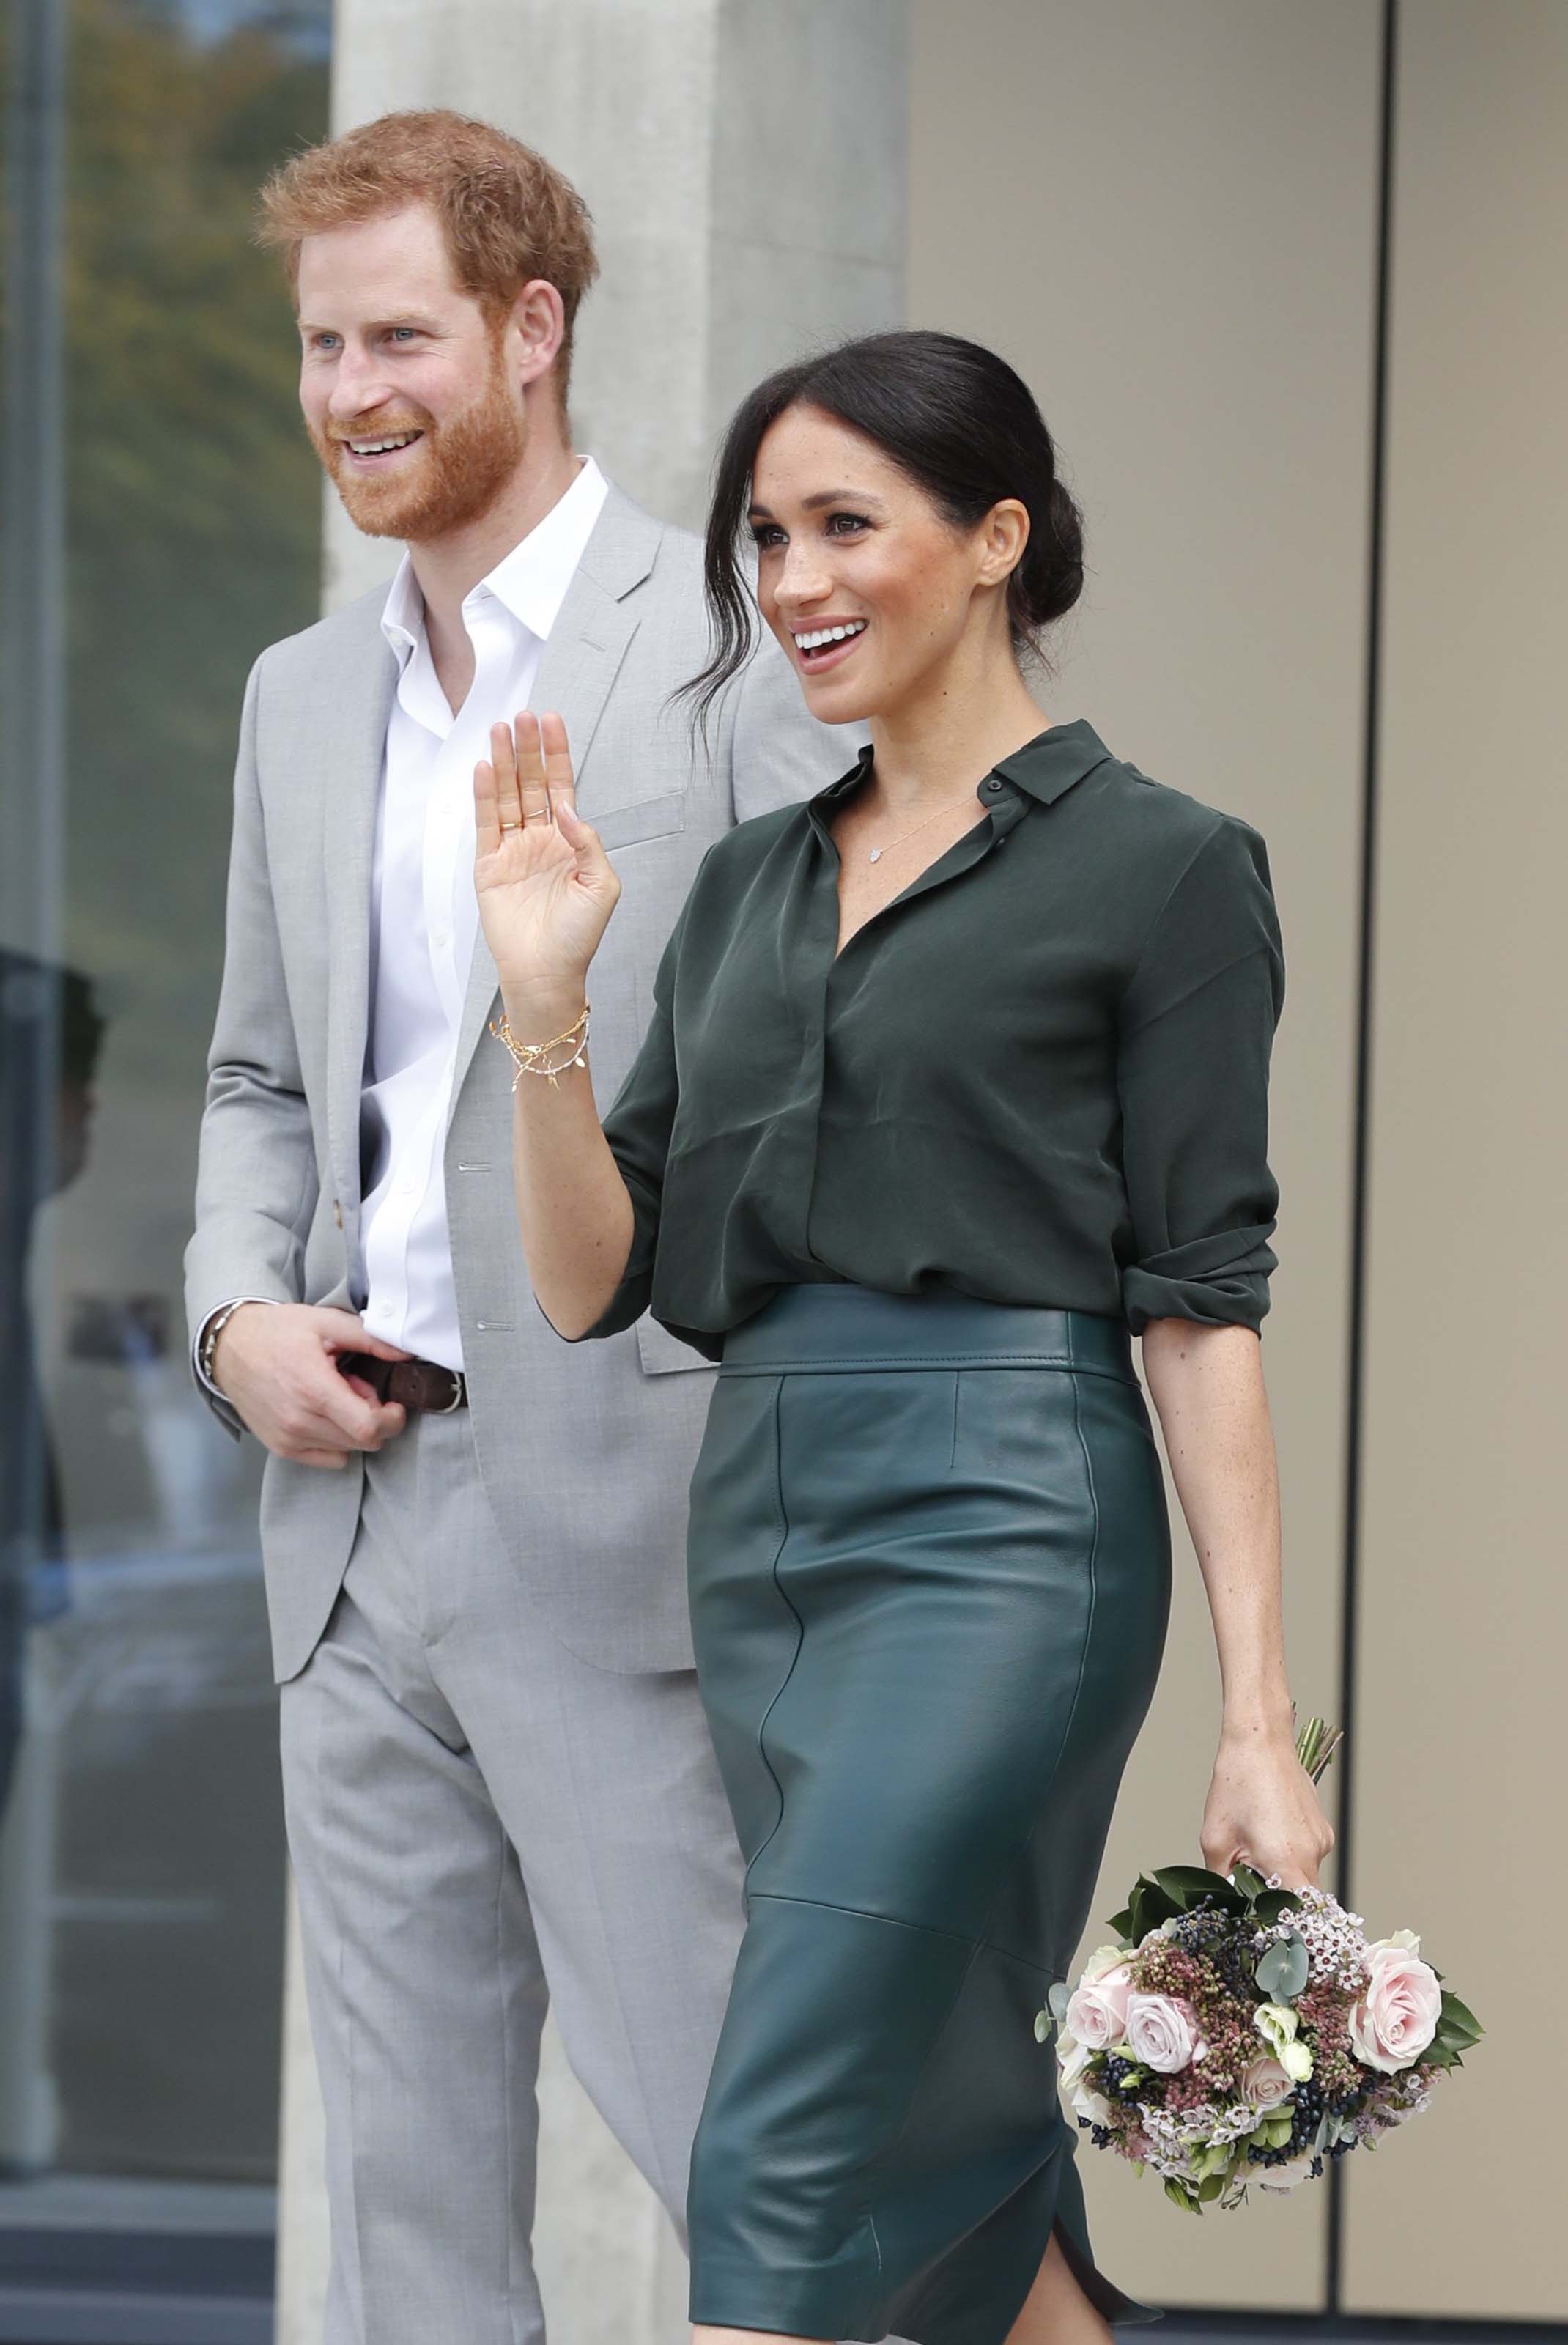 Meghan Markle at First official visit to Sussex